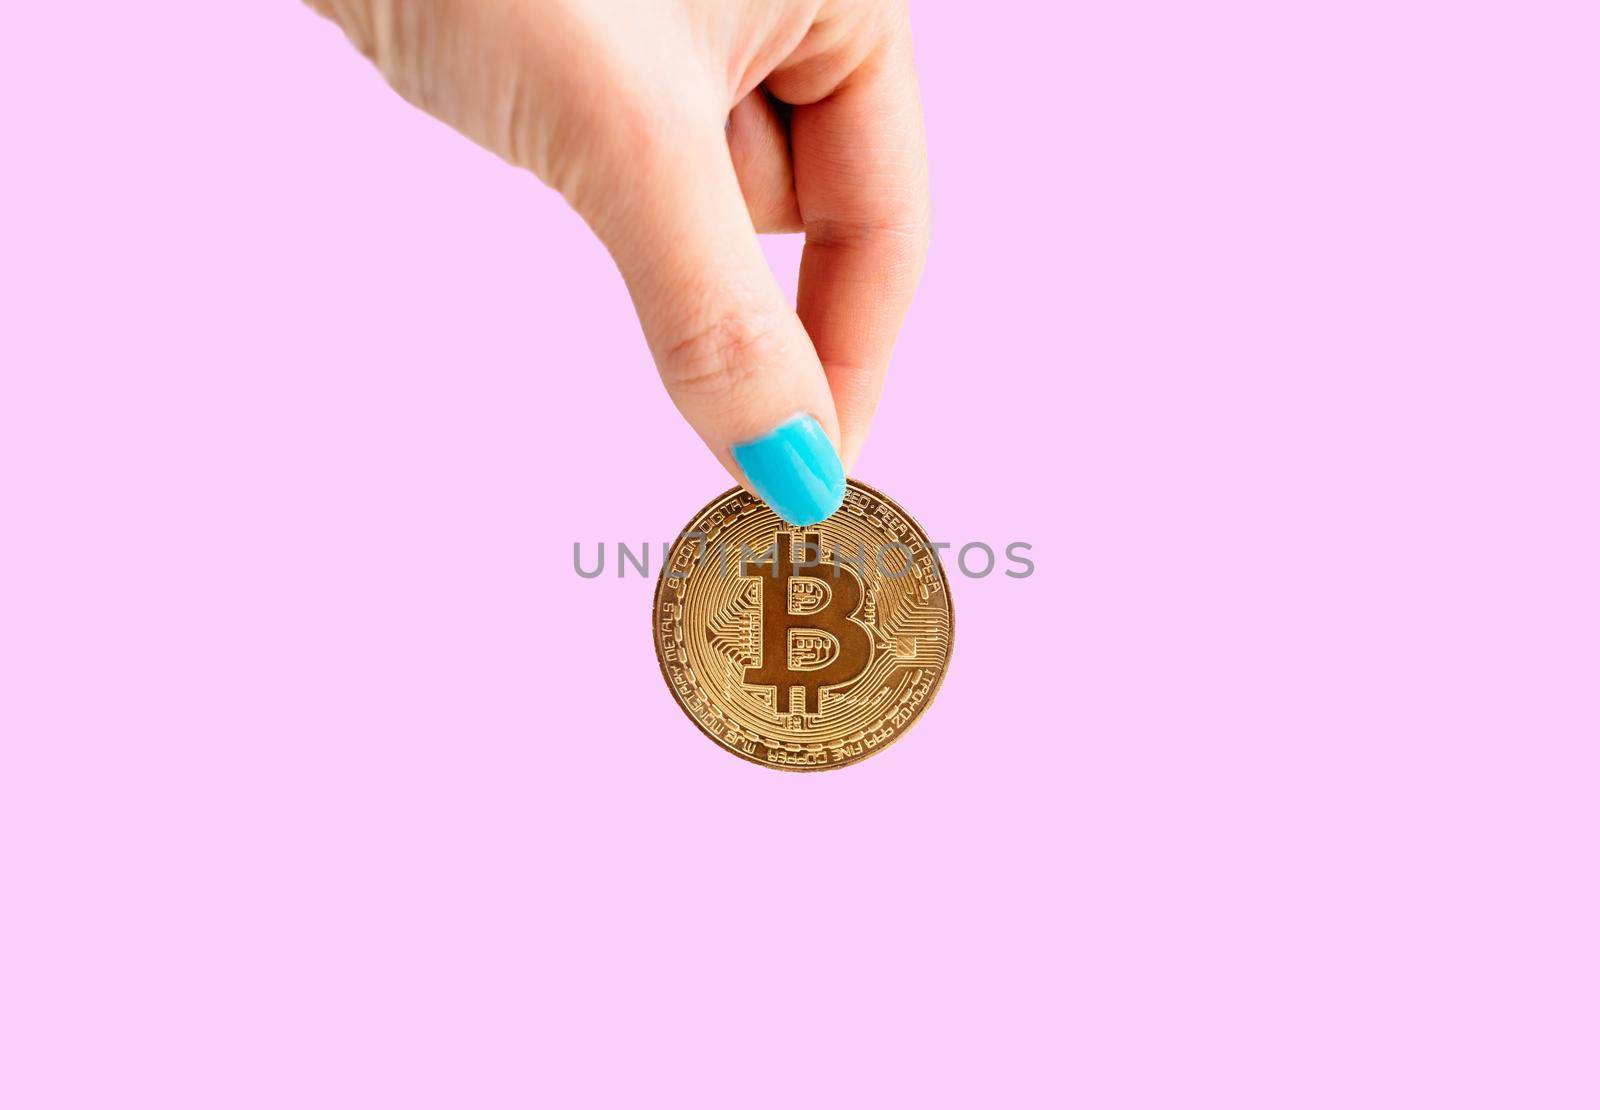 Woman’s hand with gold coin bitcoin on a pink background, symbol of virtual money.